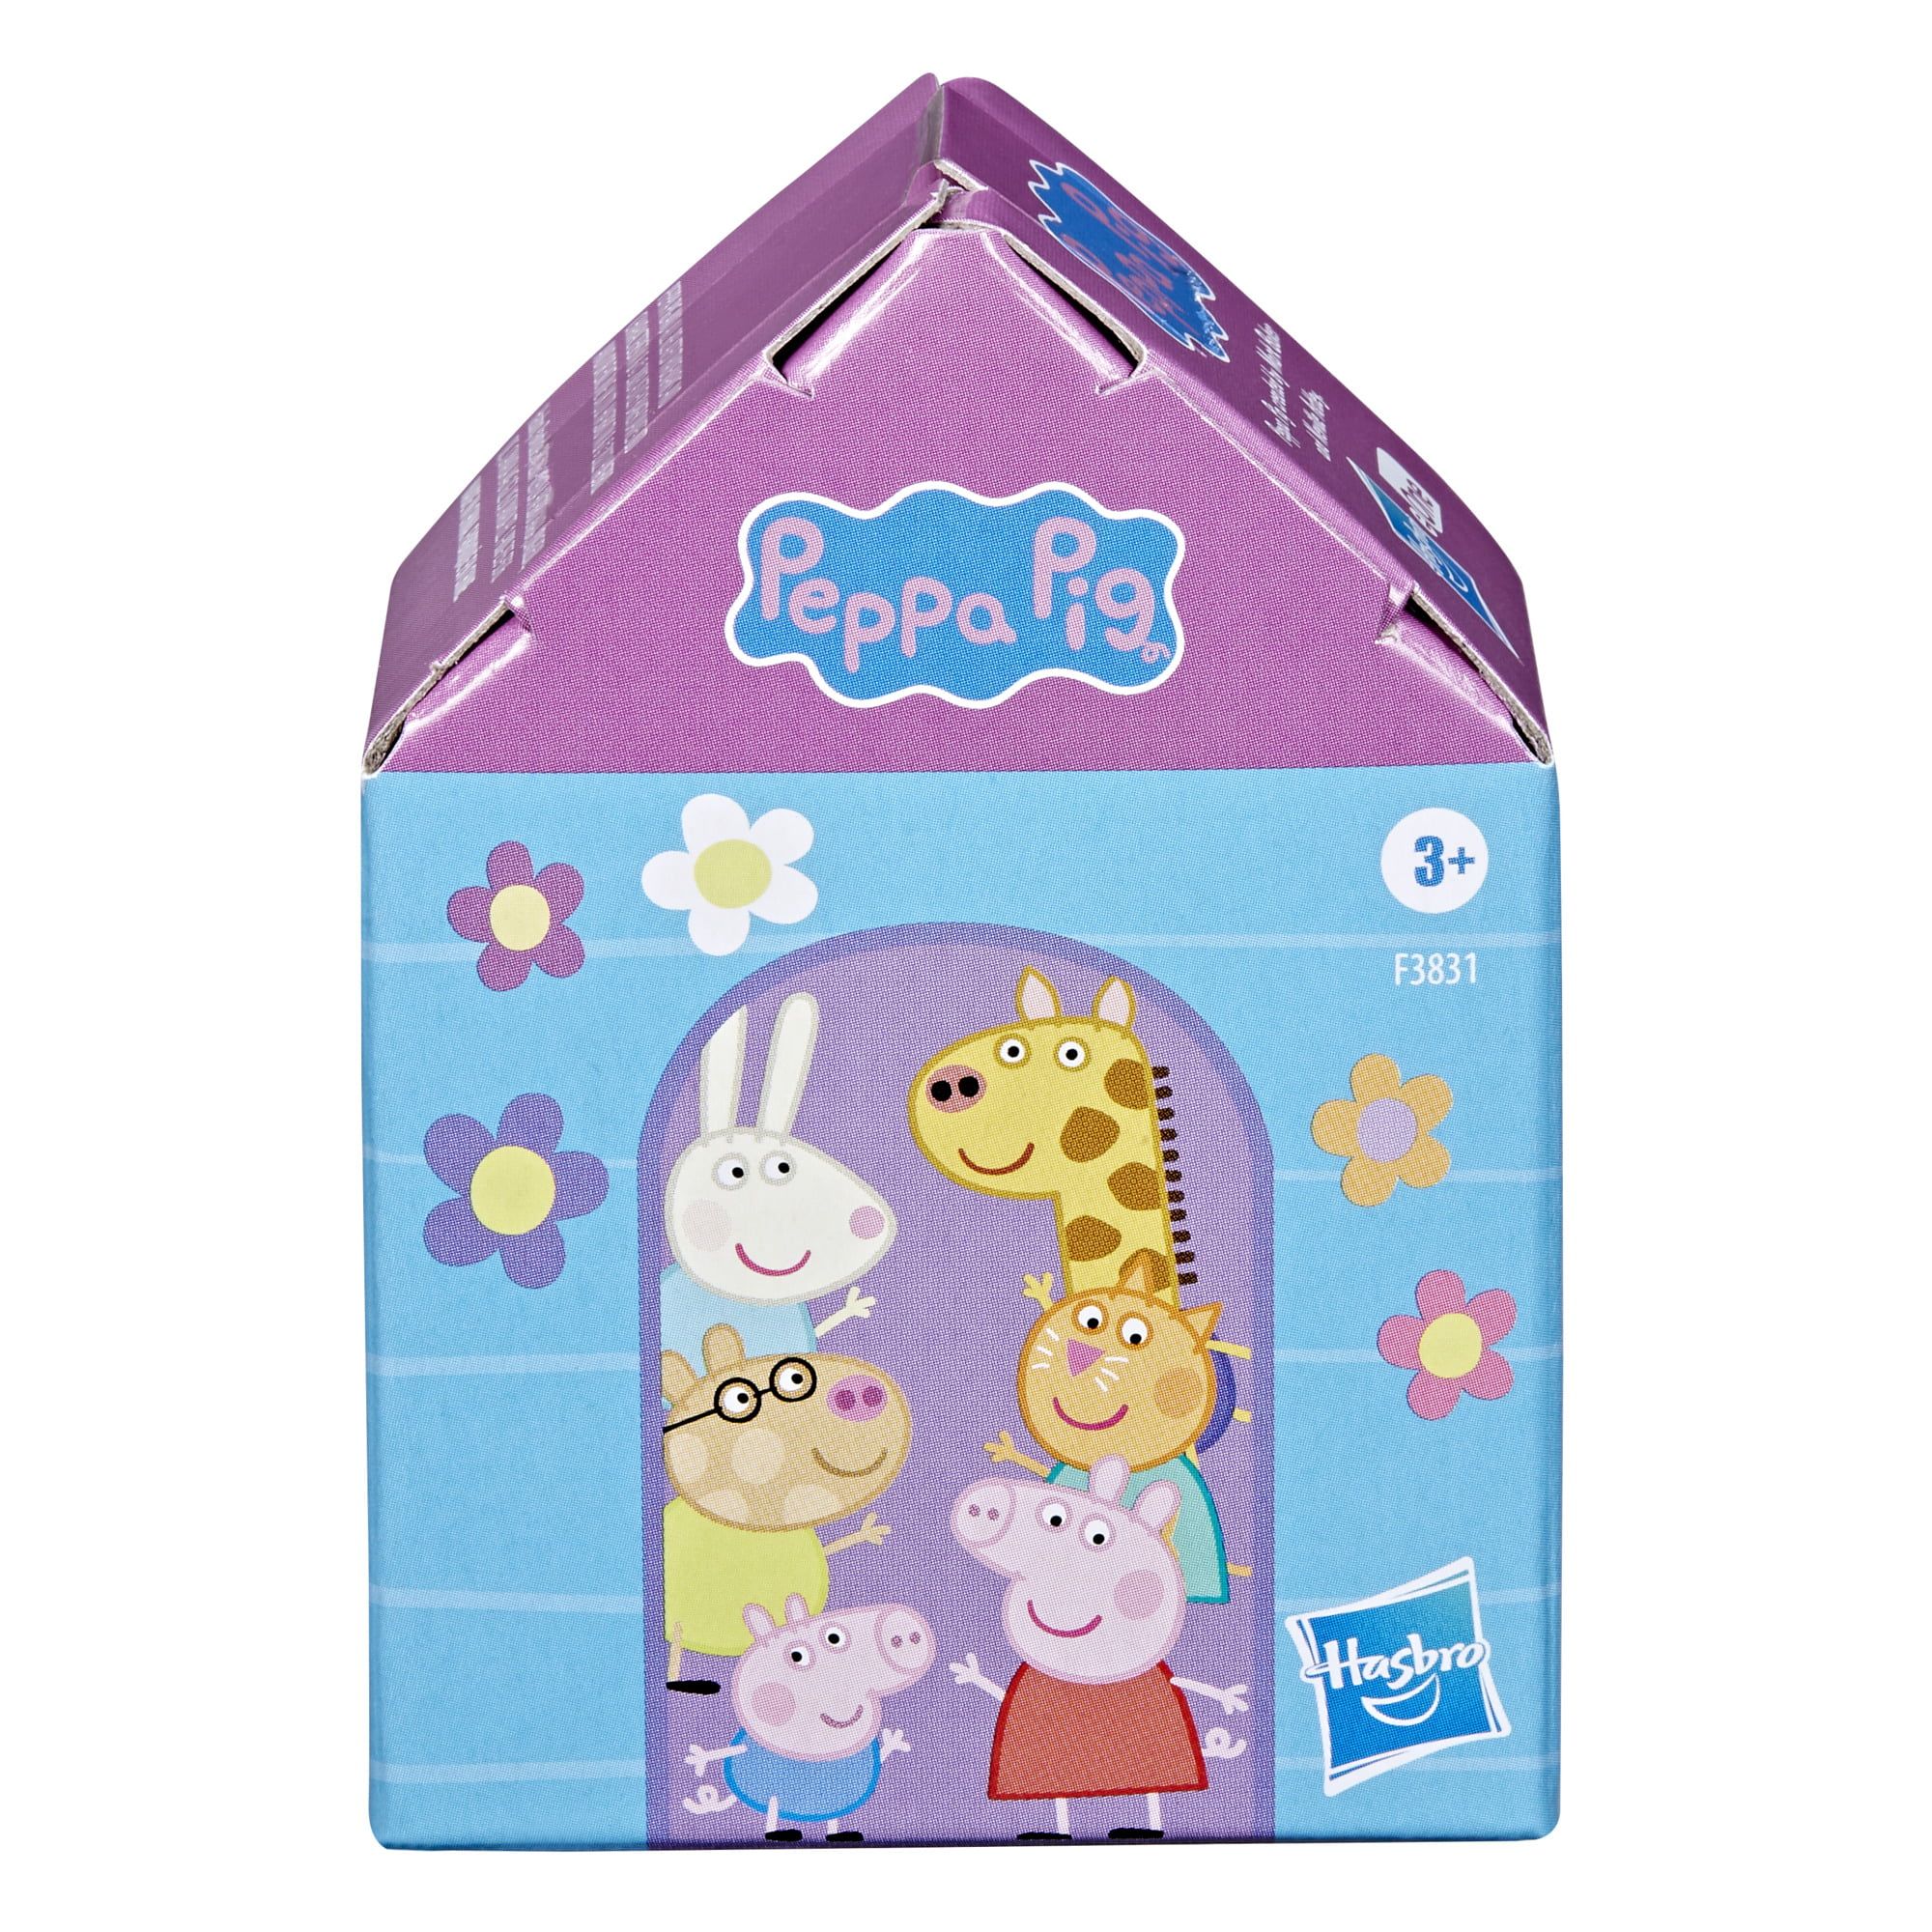 Peppa Pig Peppa’s Clubhouse Surprise, 1 of 12 Surprise Figures, Great Easter Basket Toys | Walmart (US)